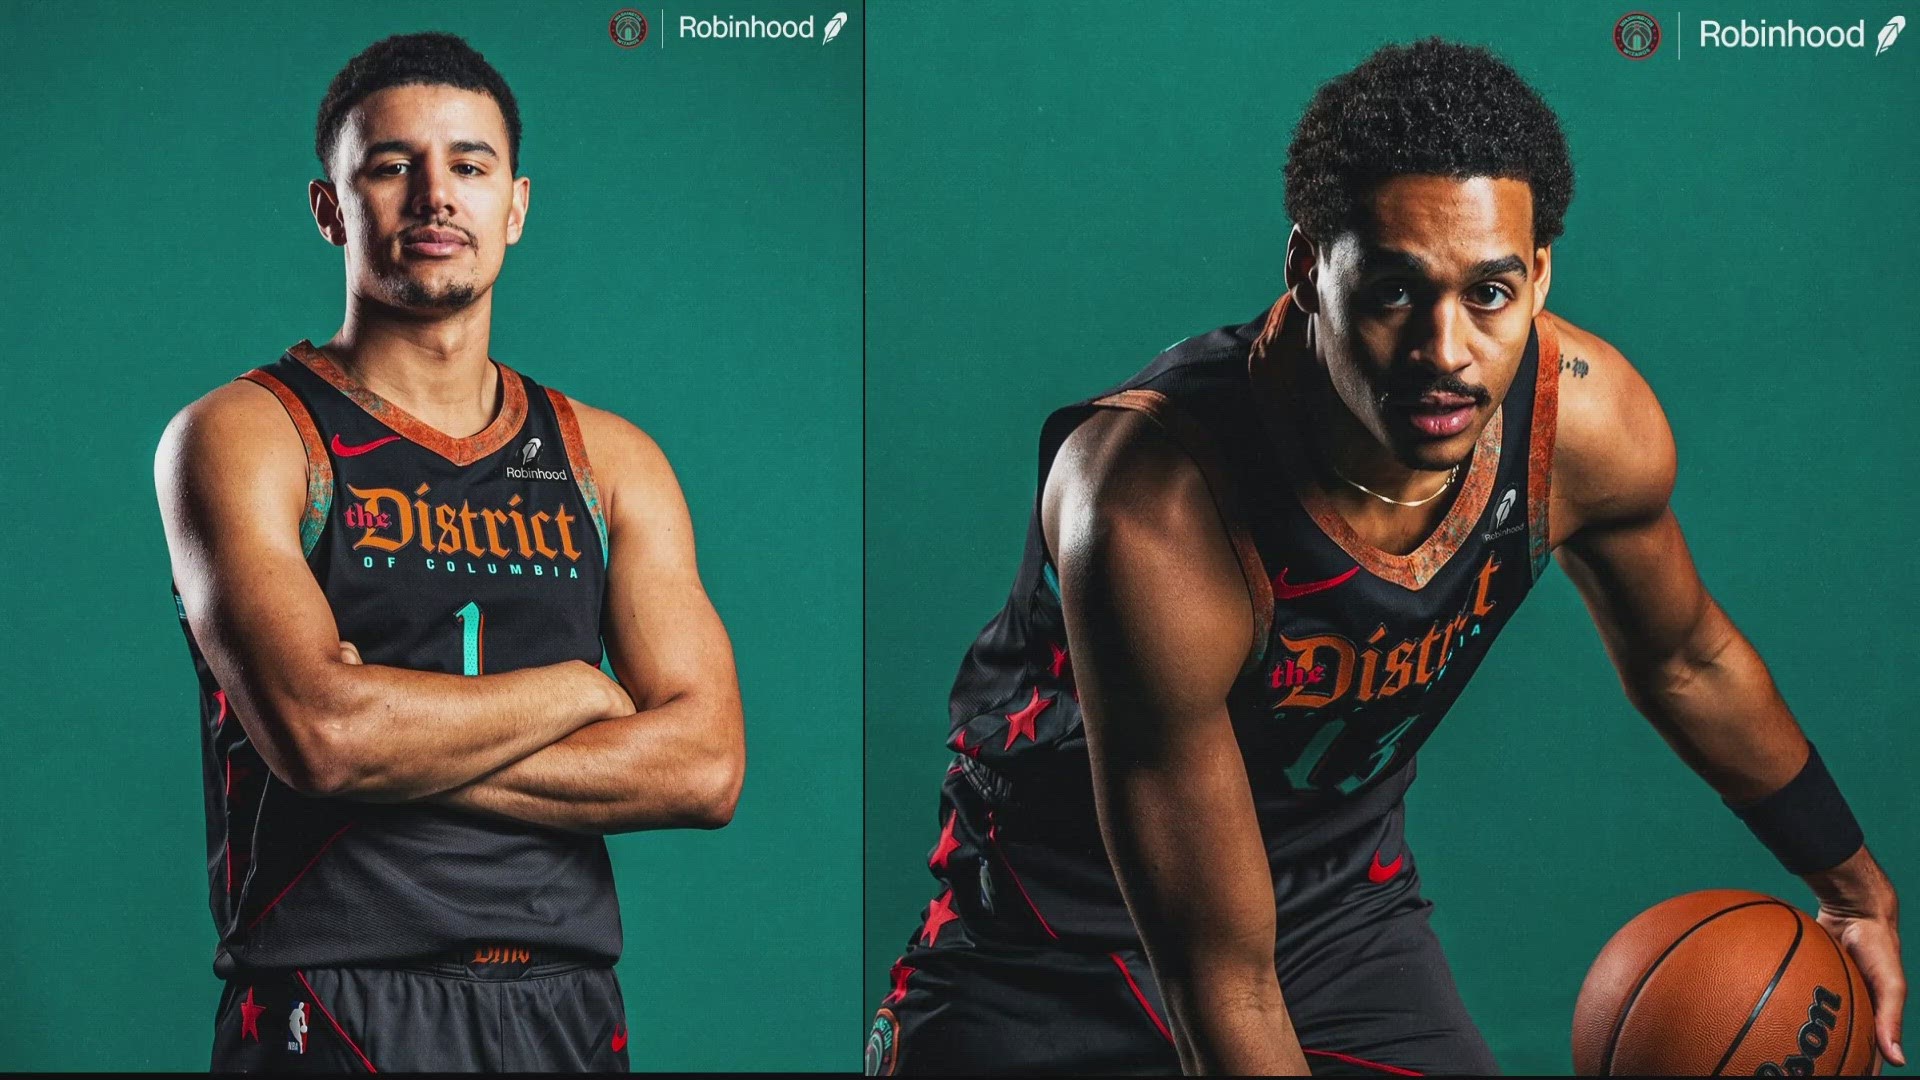 Here's a look at this year's black and grey uniform with copper, teal, and red accent colors. The colors represent pieces of DC history.